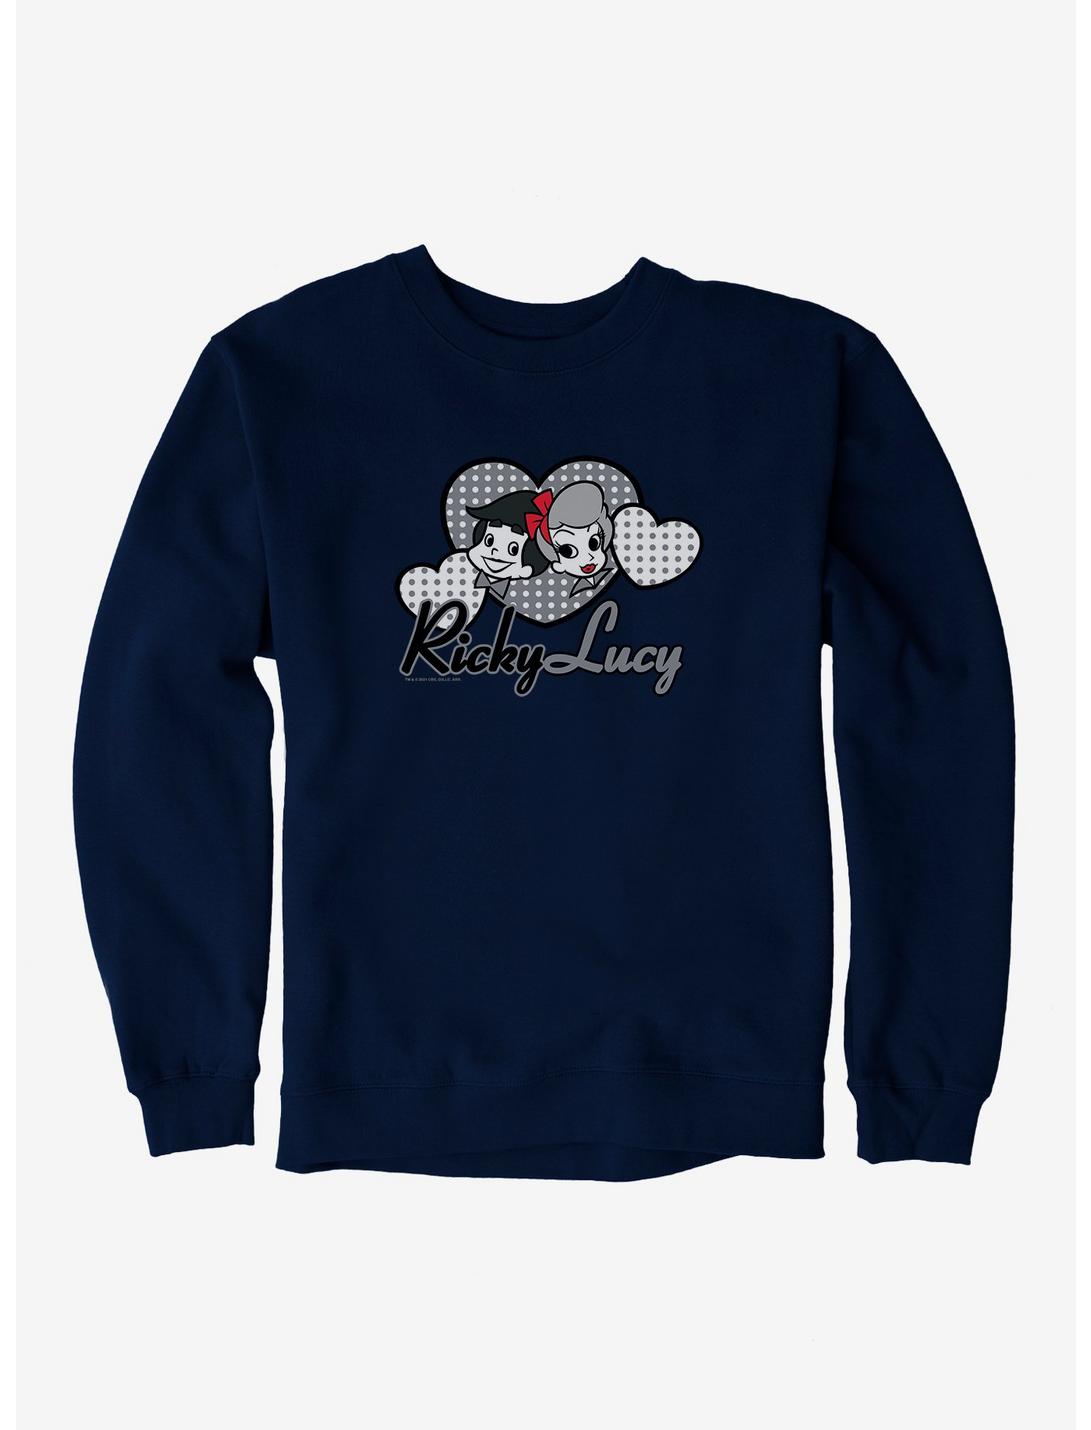 I Love Lucy Ricky And Lucy Cartoon Sweatshirt, , hi-res